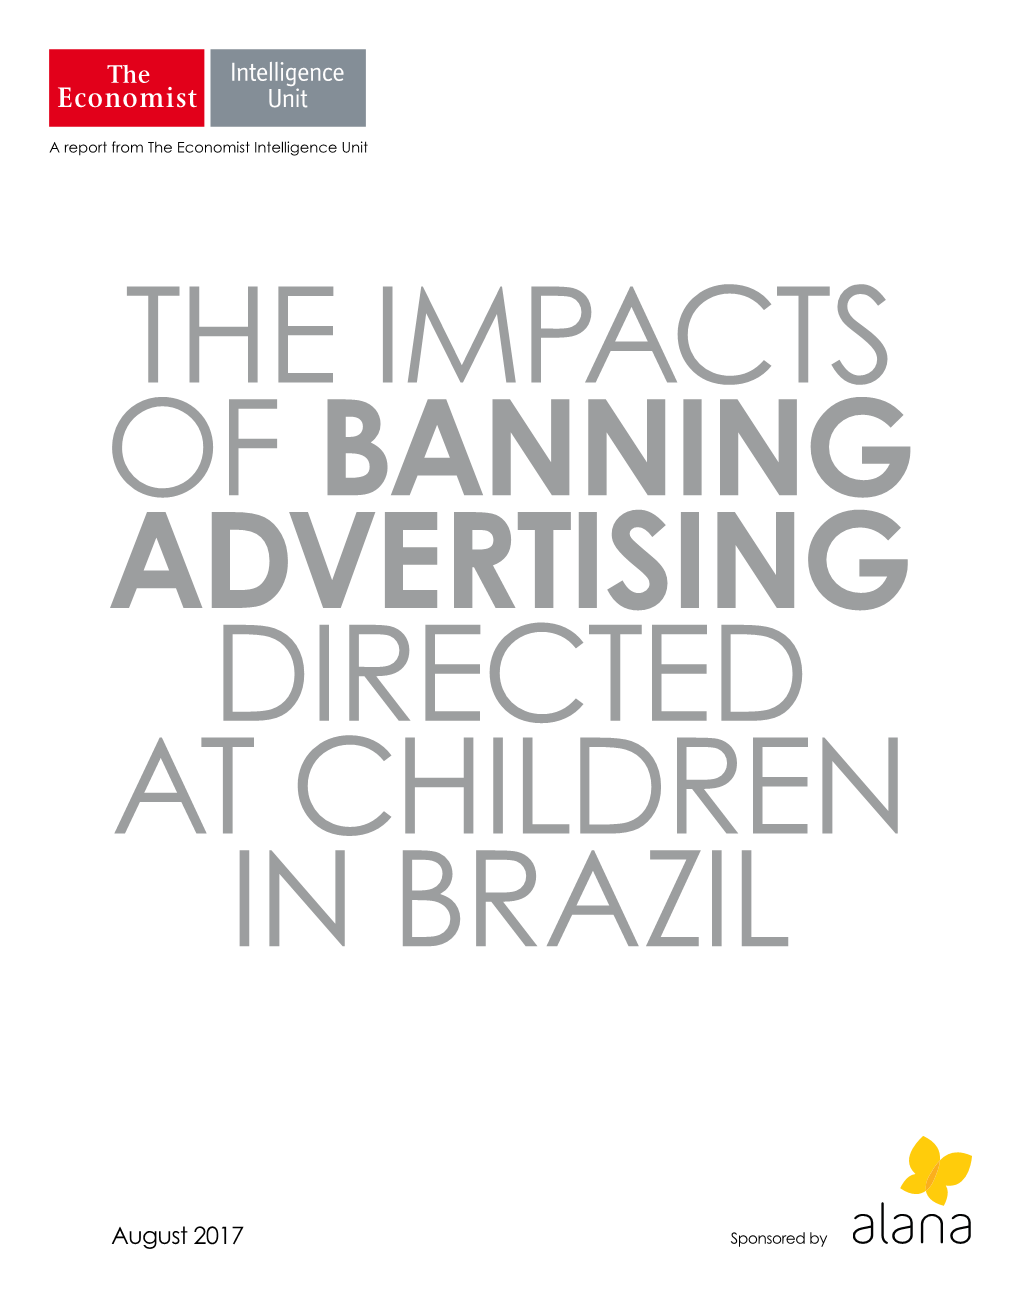 The Impacts of Banning Advertising Directed at Children in Brazil